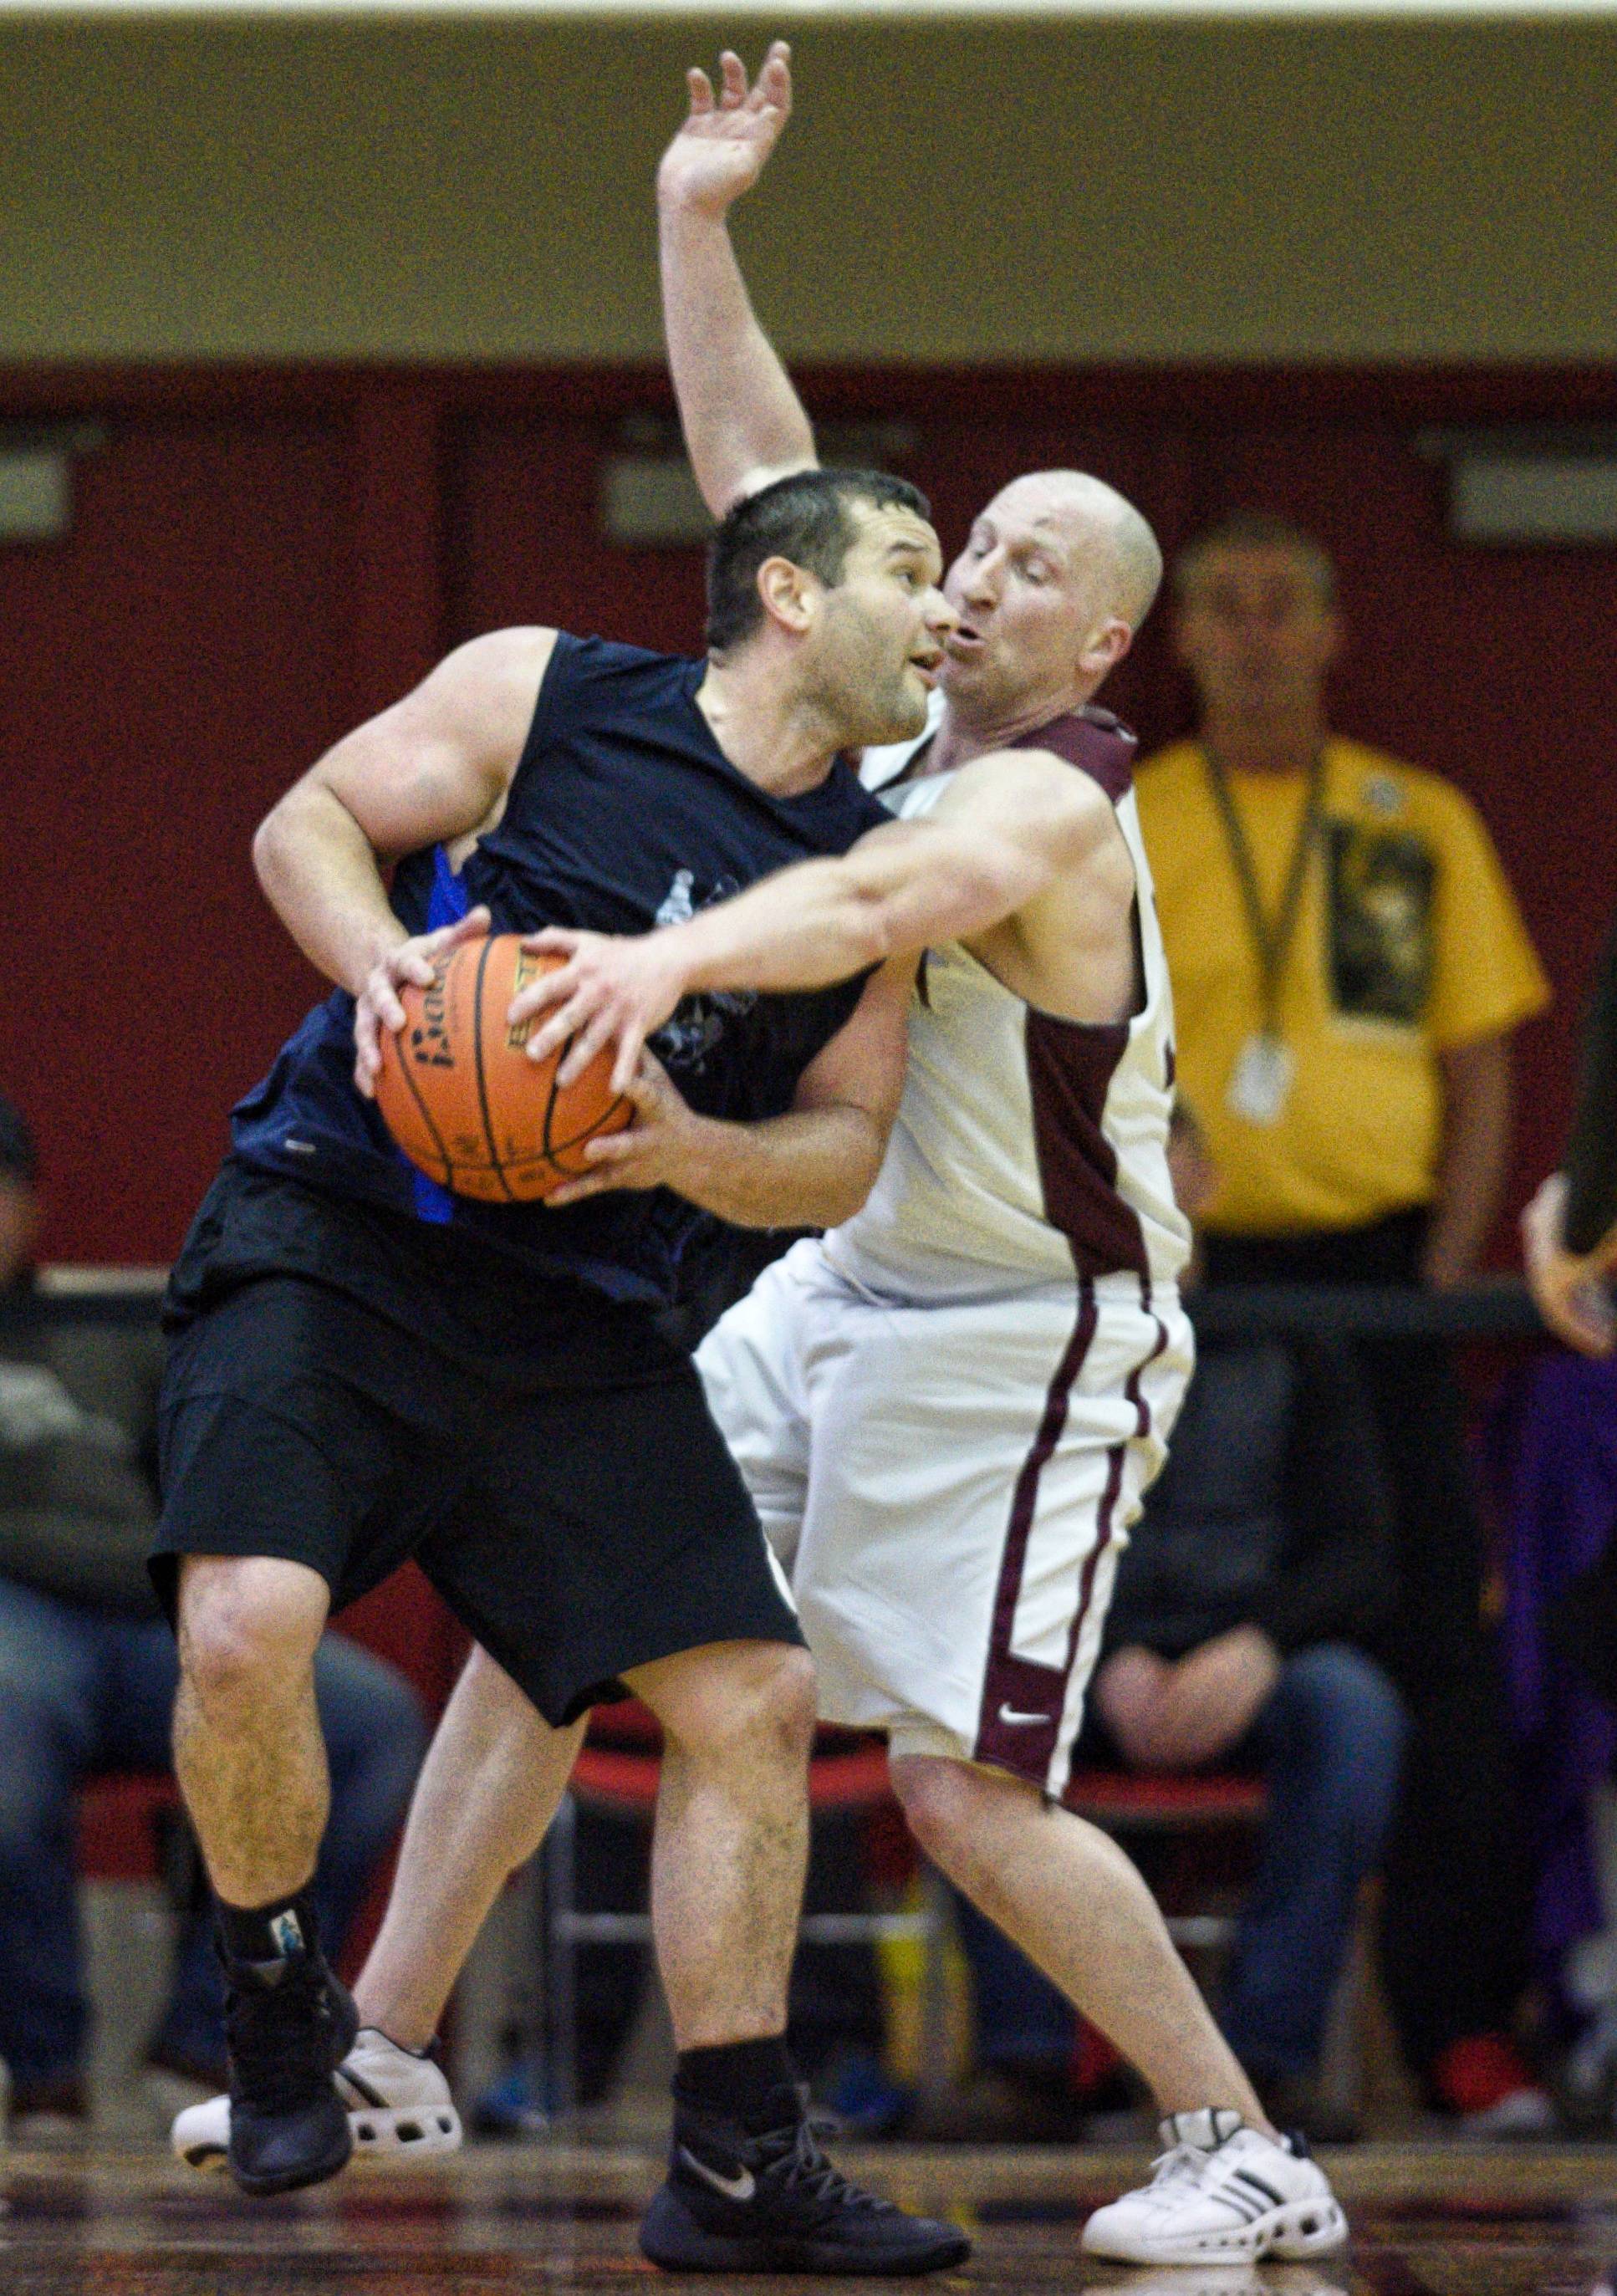 Hydaburg’s Fred Hamilton, left, is guarded by Klukwan’s Brian Friske in the C bracket final at the Gold Medal Basketball Tournament on Saturday, March 23, 2019. (Michael Penn | Juneau Empire)